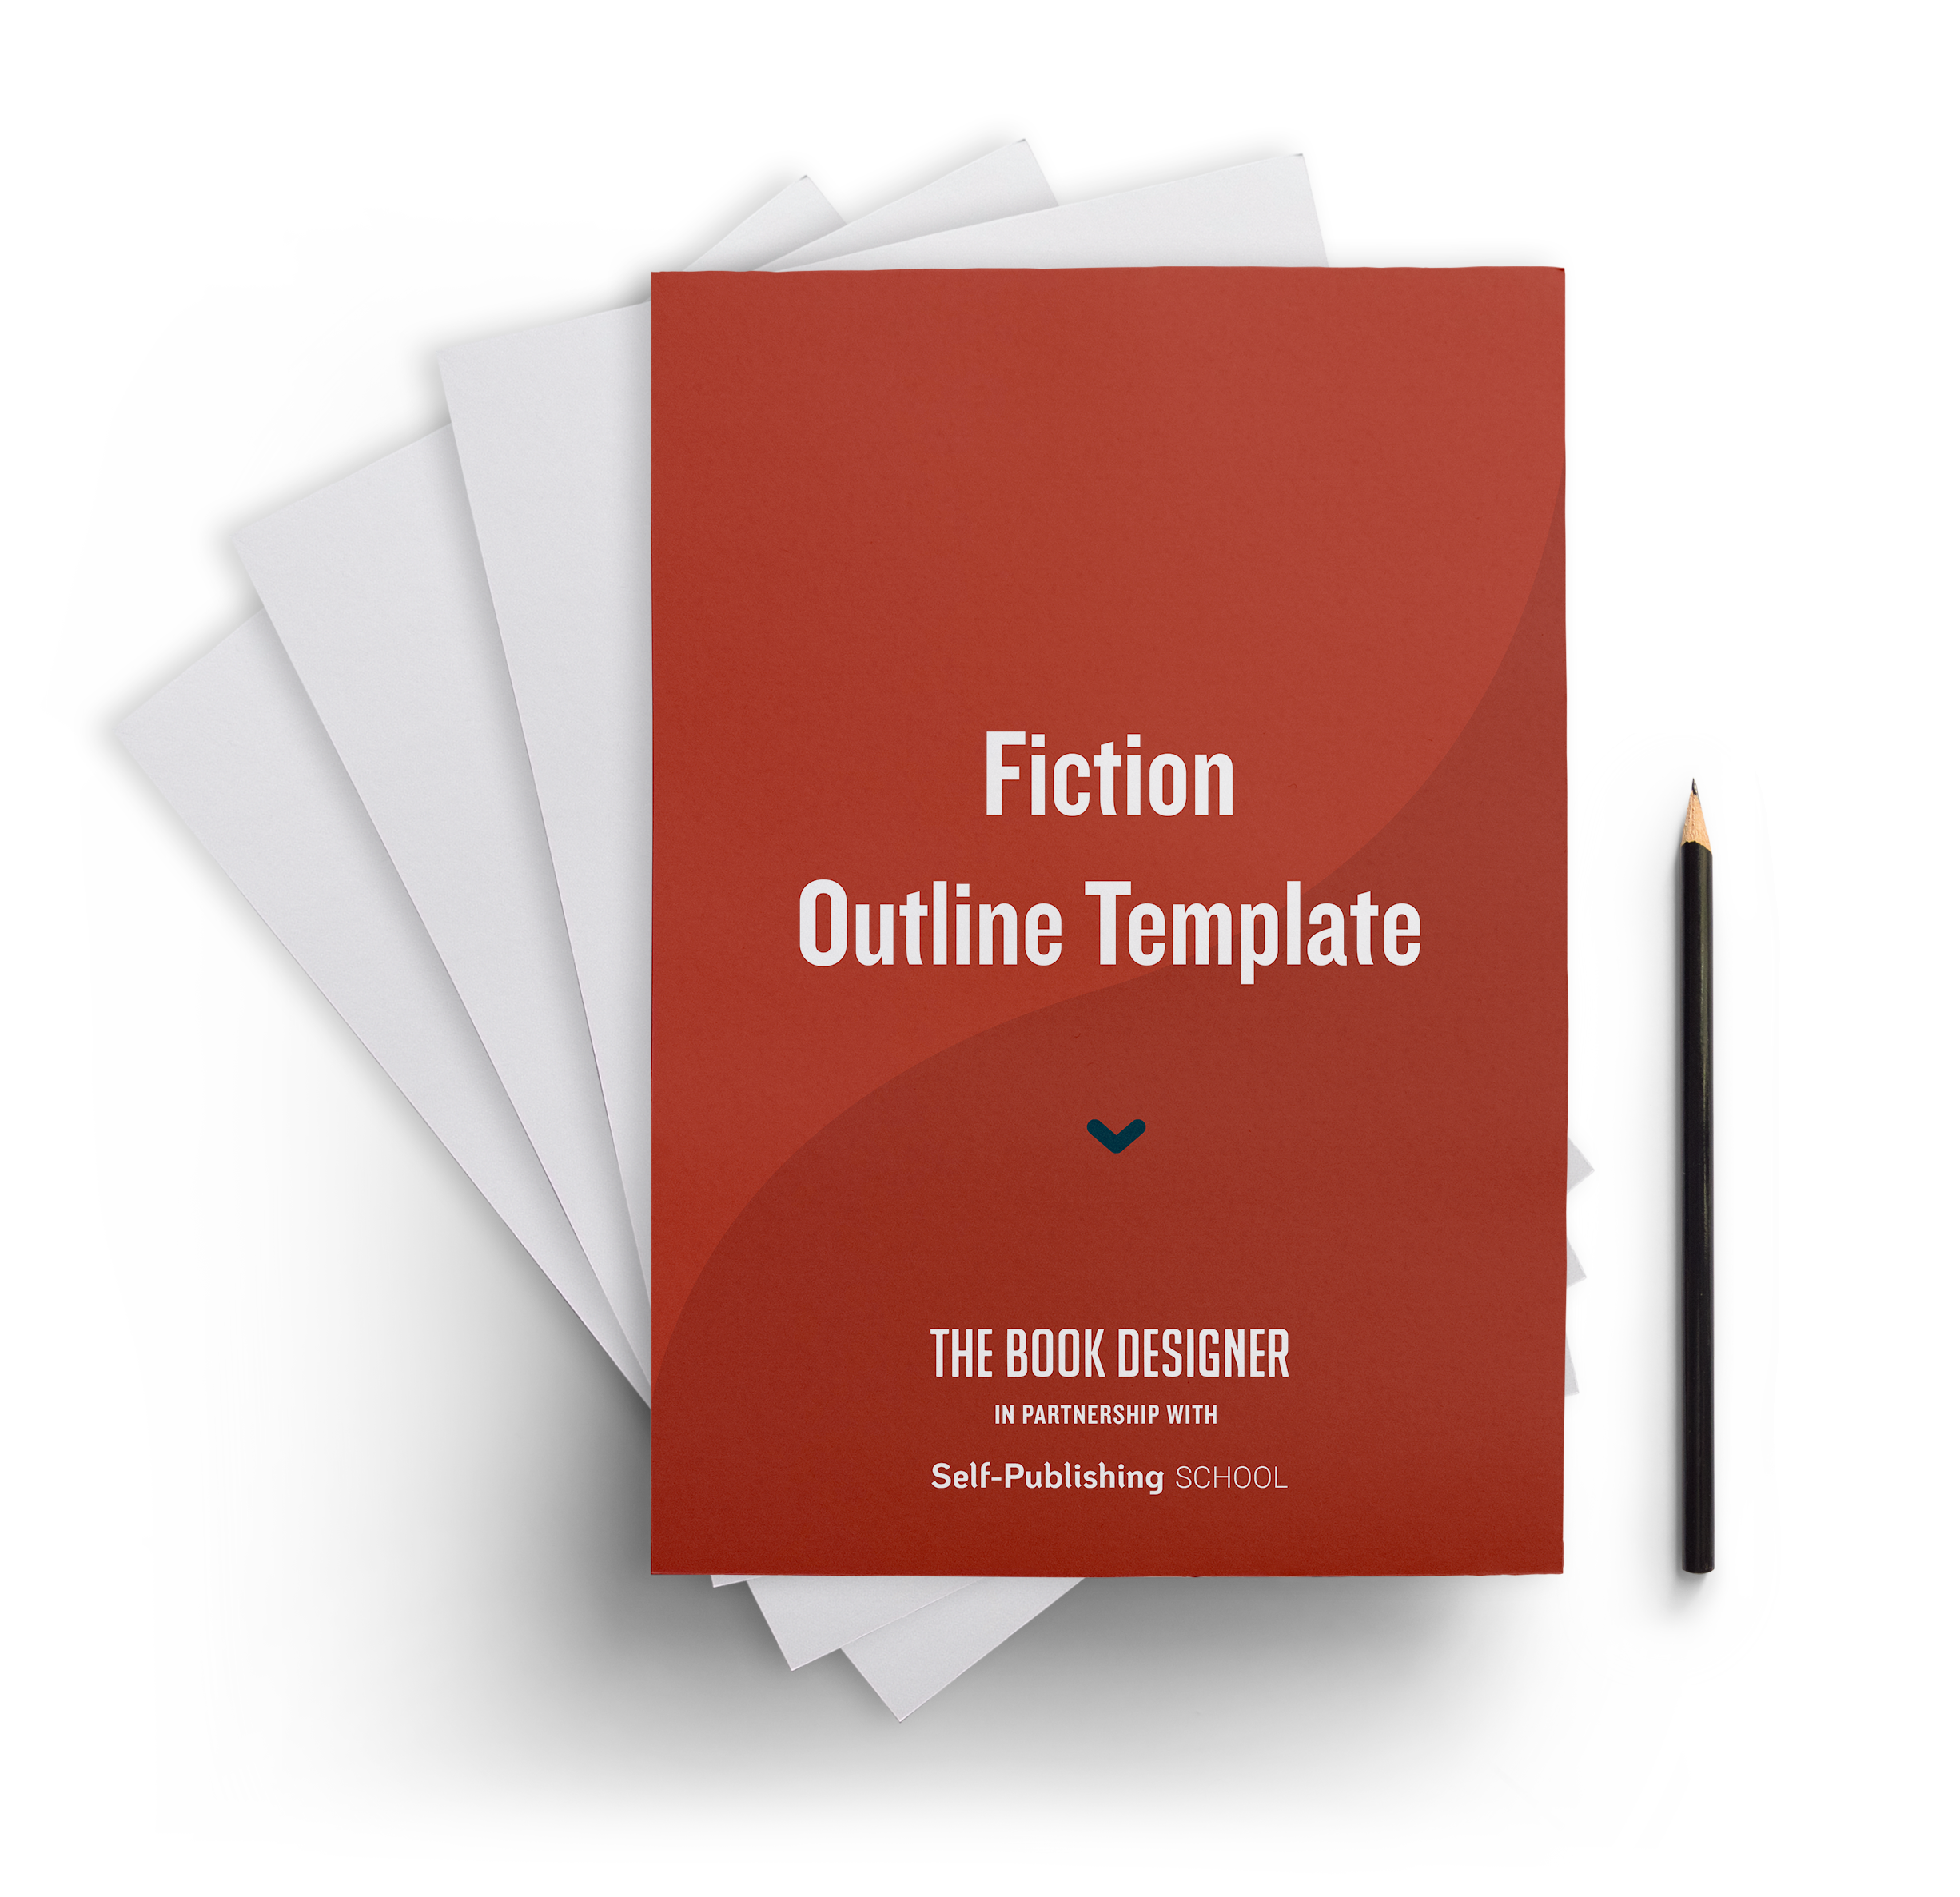 tbd-fiction-outline-template (1)